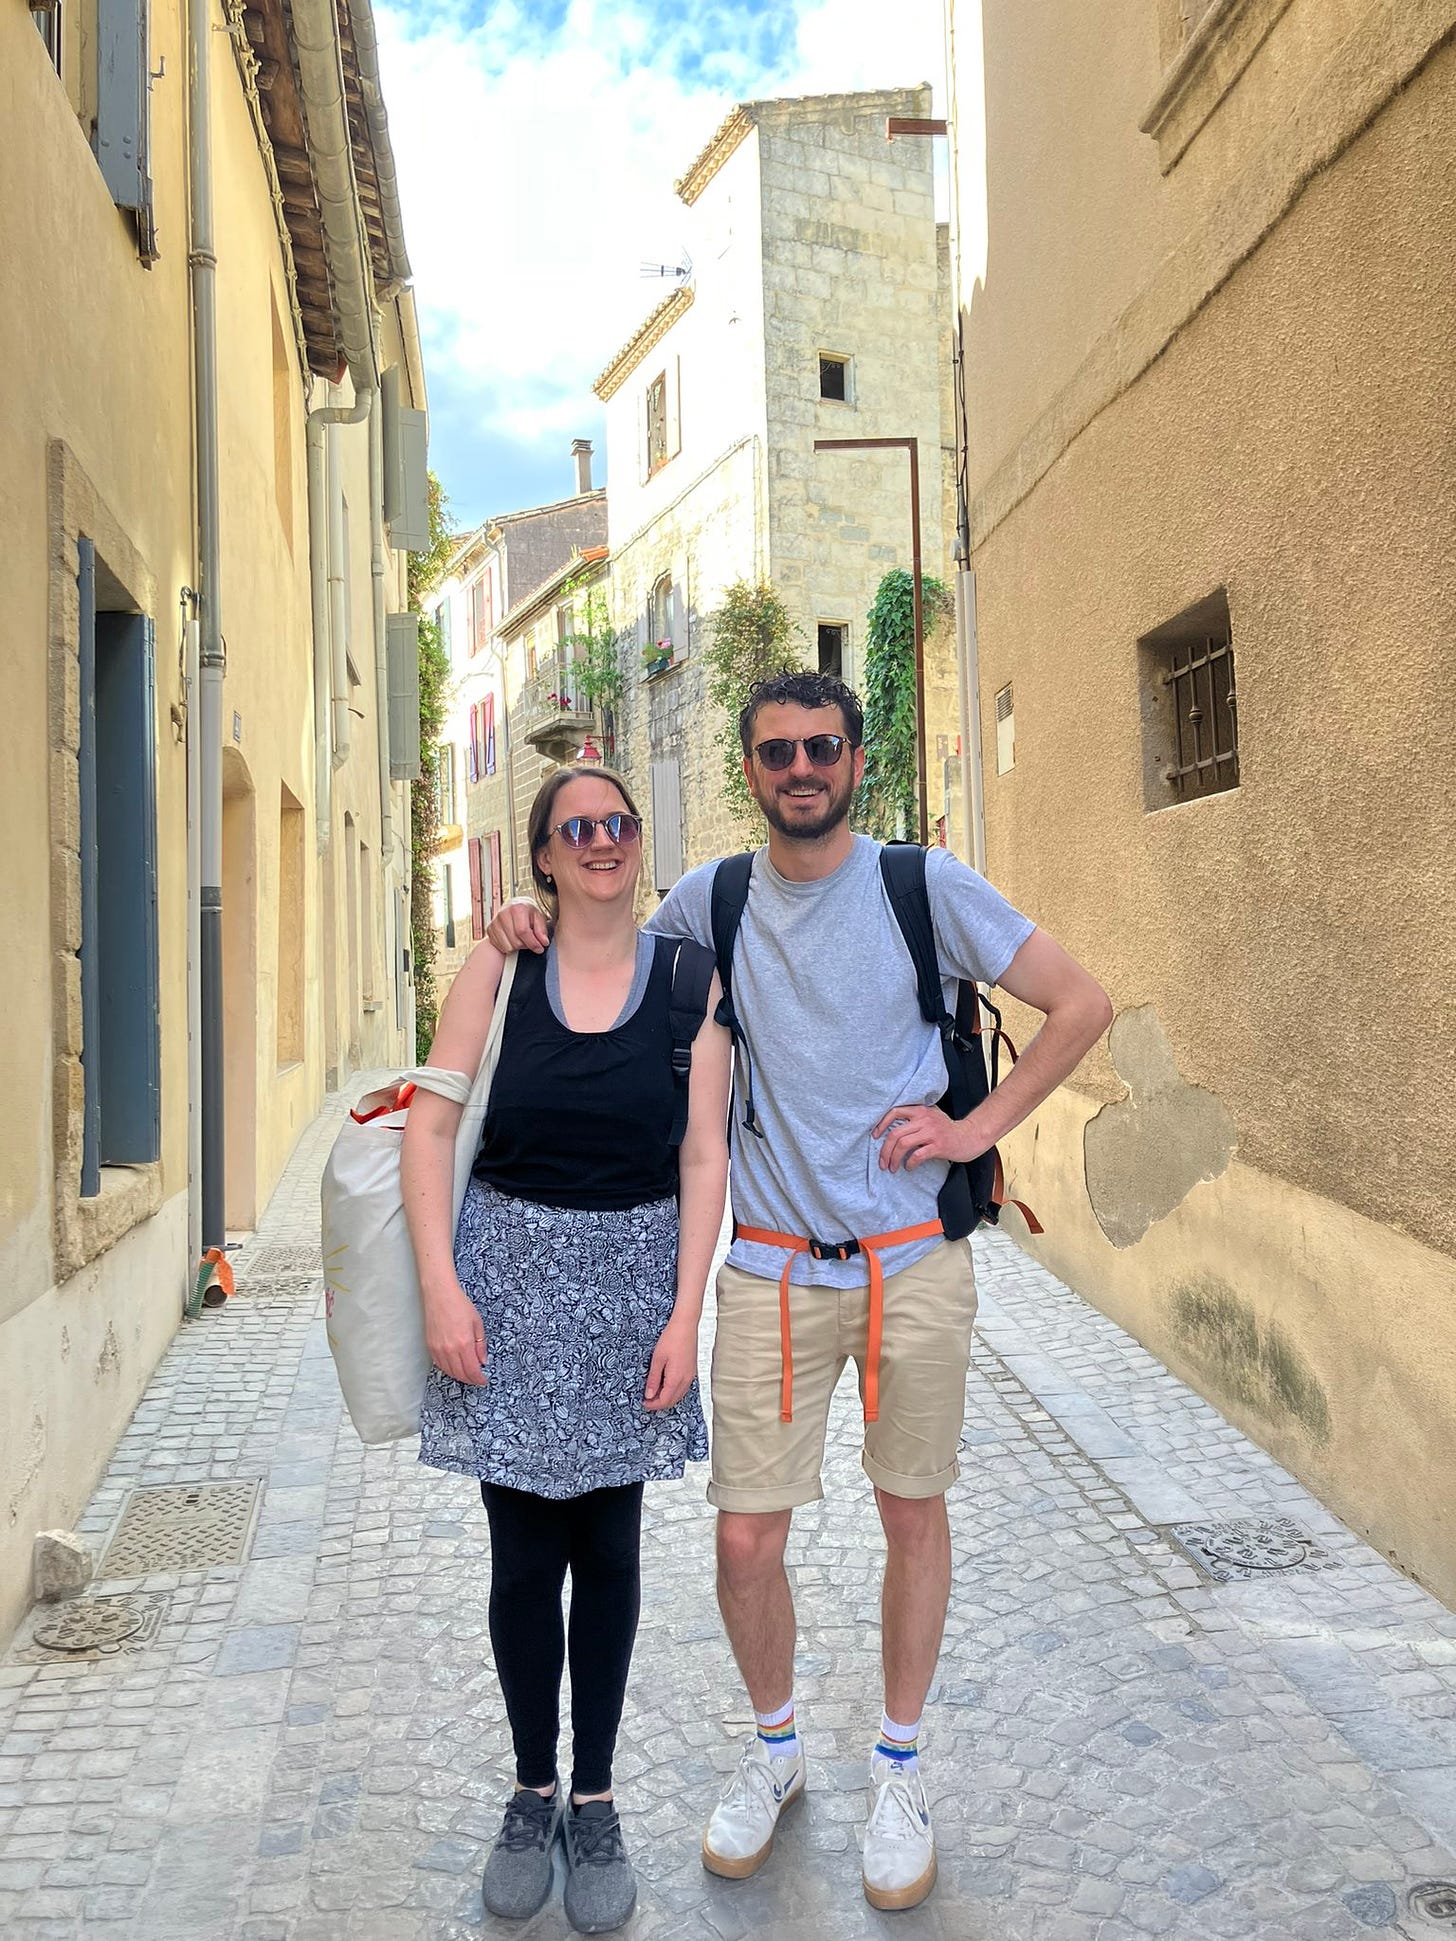 Me and my brother standing together in an old French town